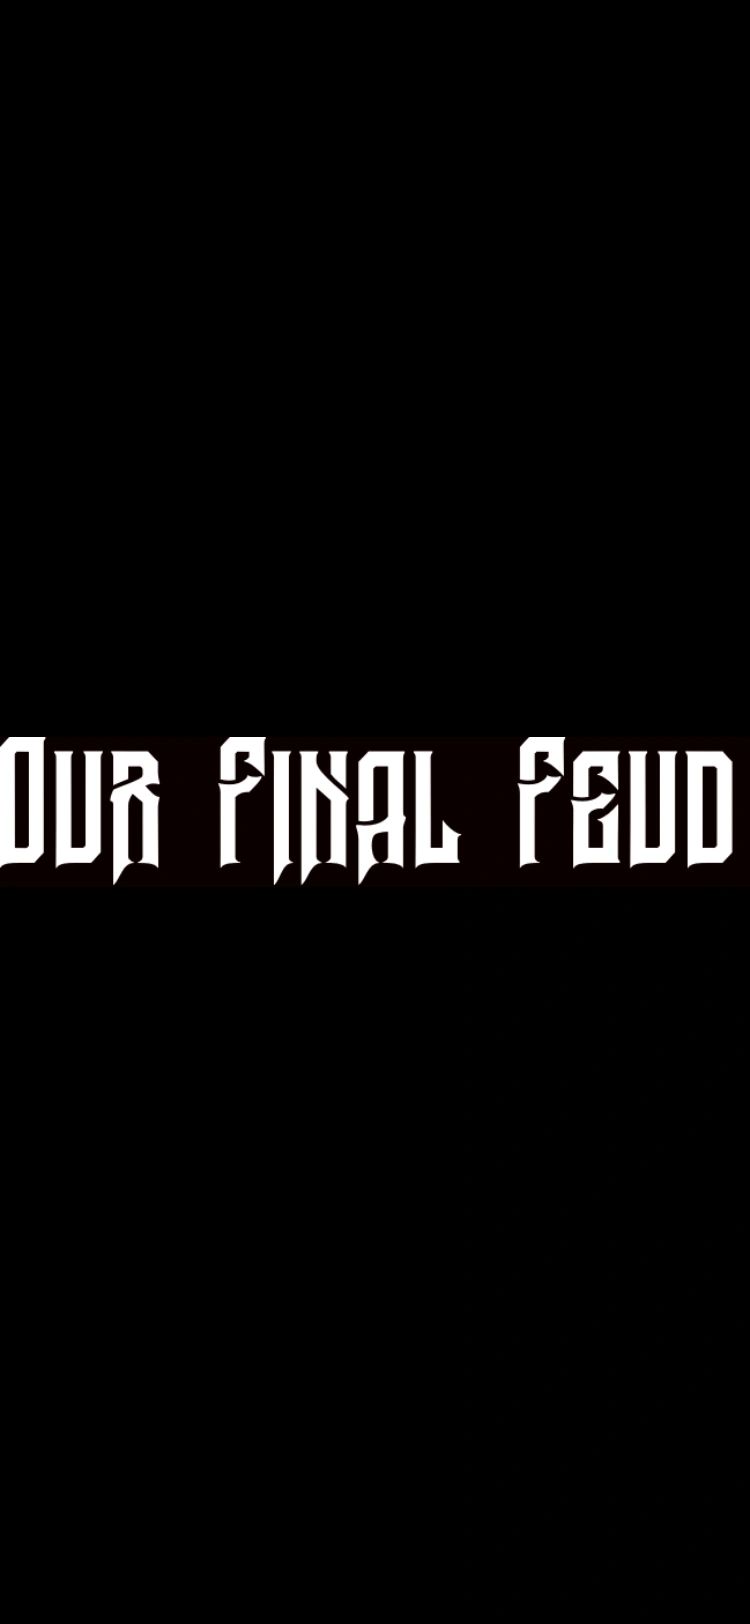 Our Final Feud Official